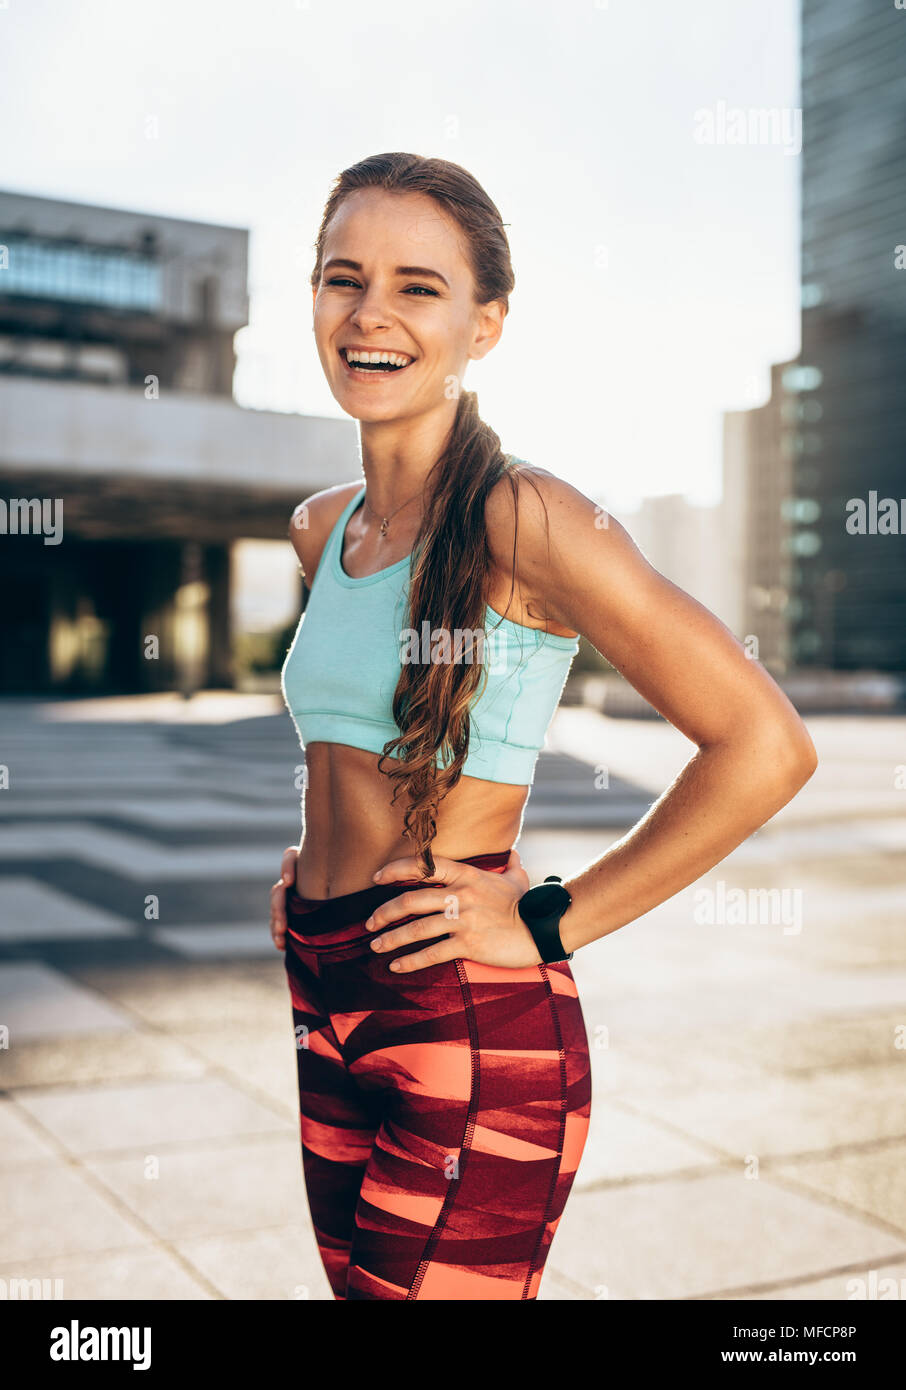 https://c8.alamy.com/comp/MFCP8P/portrait-of-sportswoman-smiling-outdoors-in-morning-female-in-running-outfit-standing-outdoors-in-city-MFCP8P.jpg